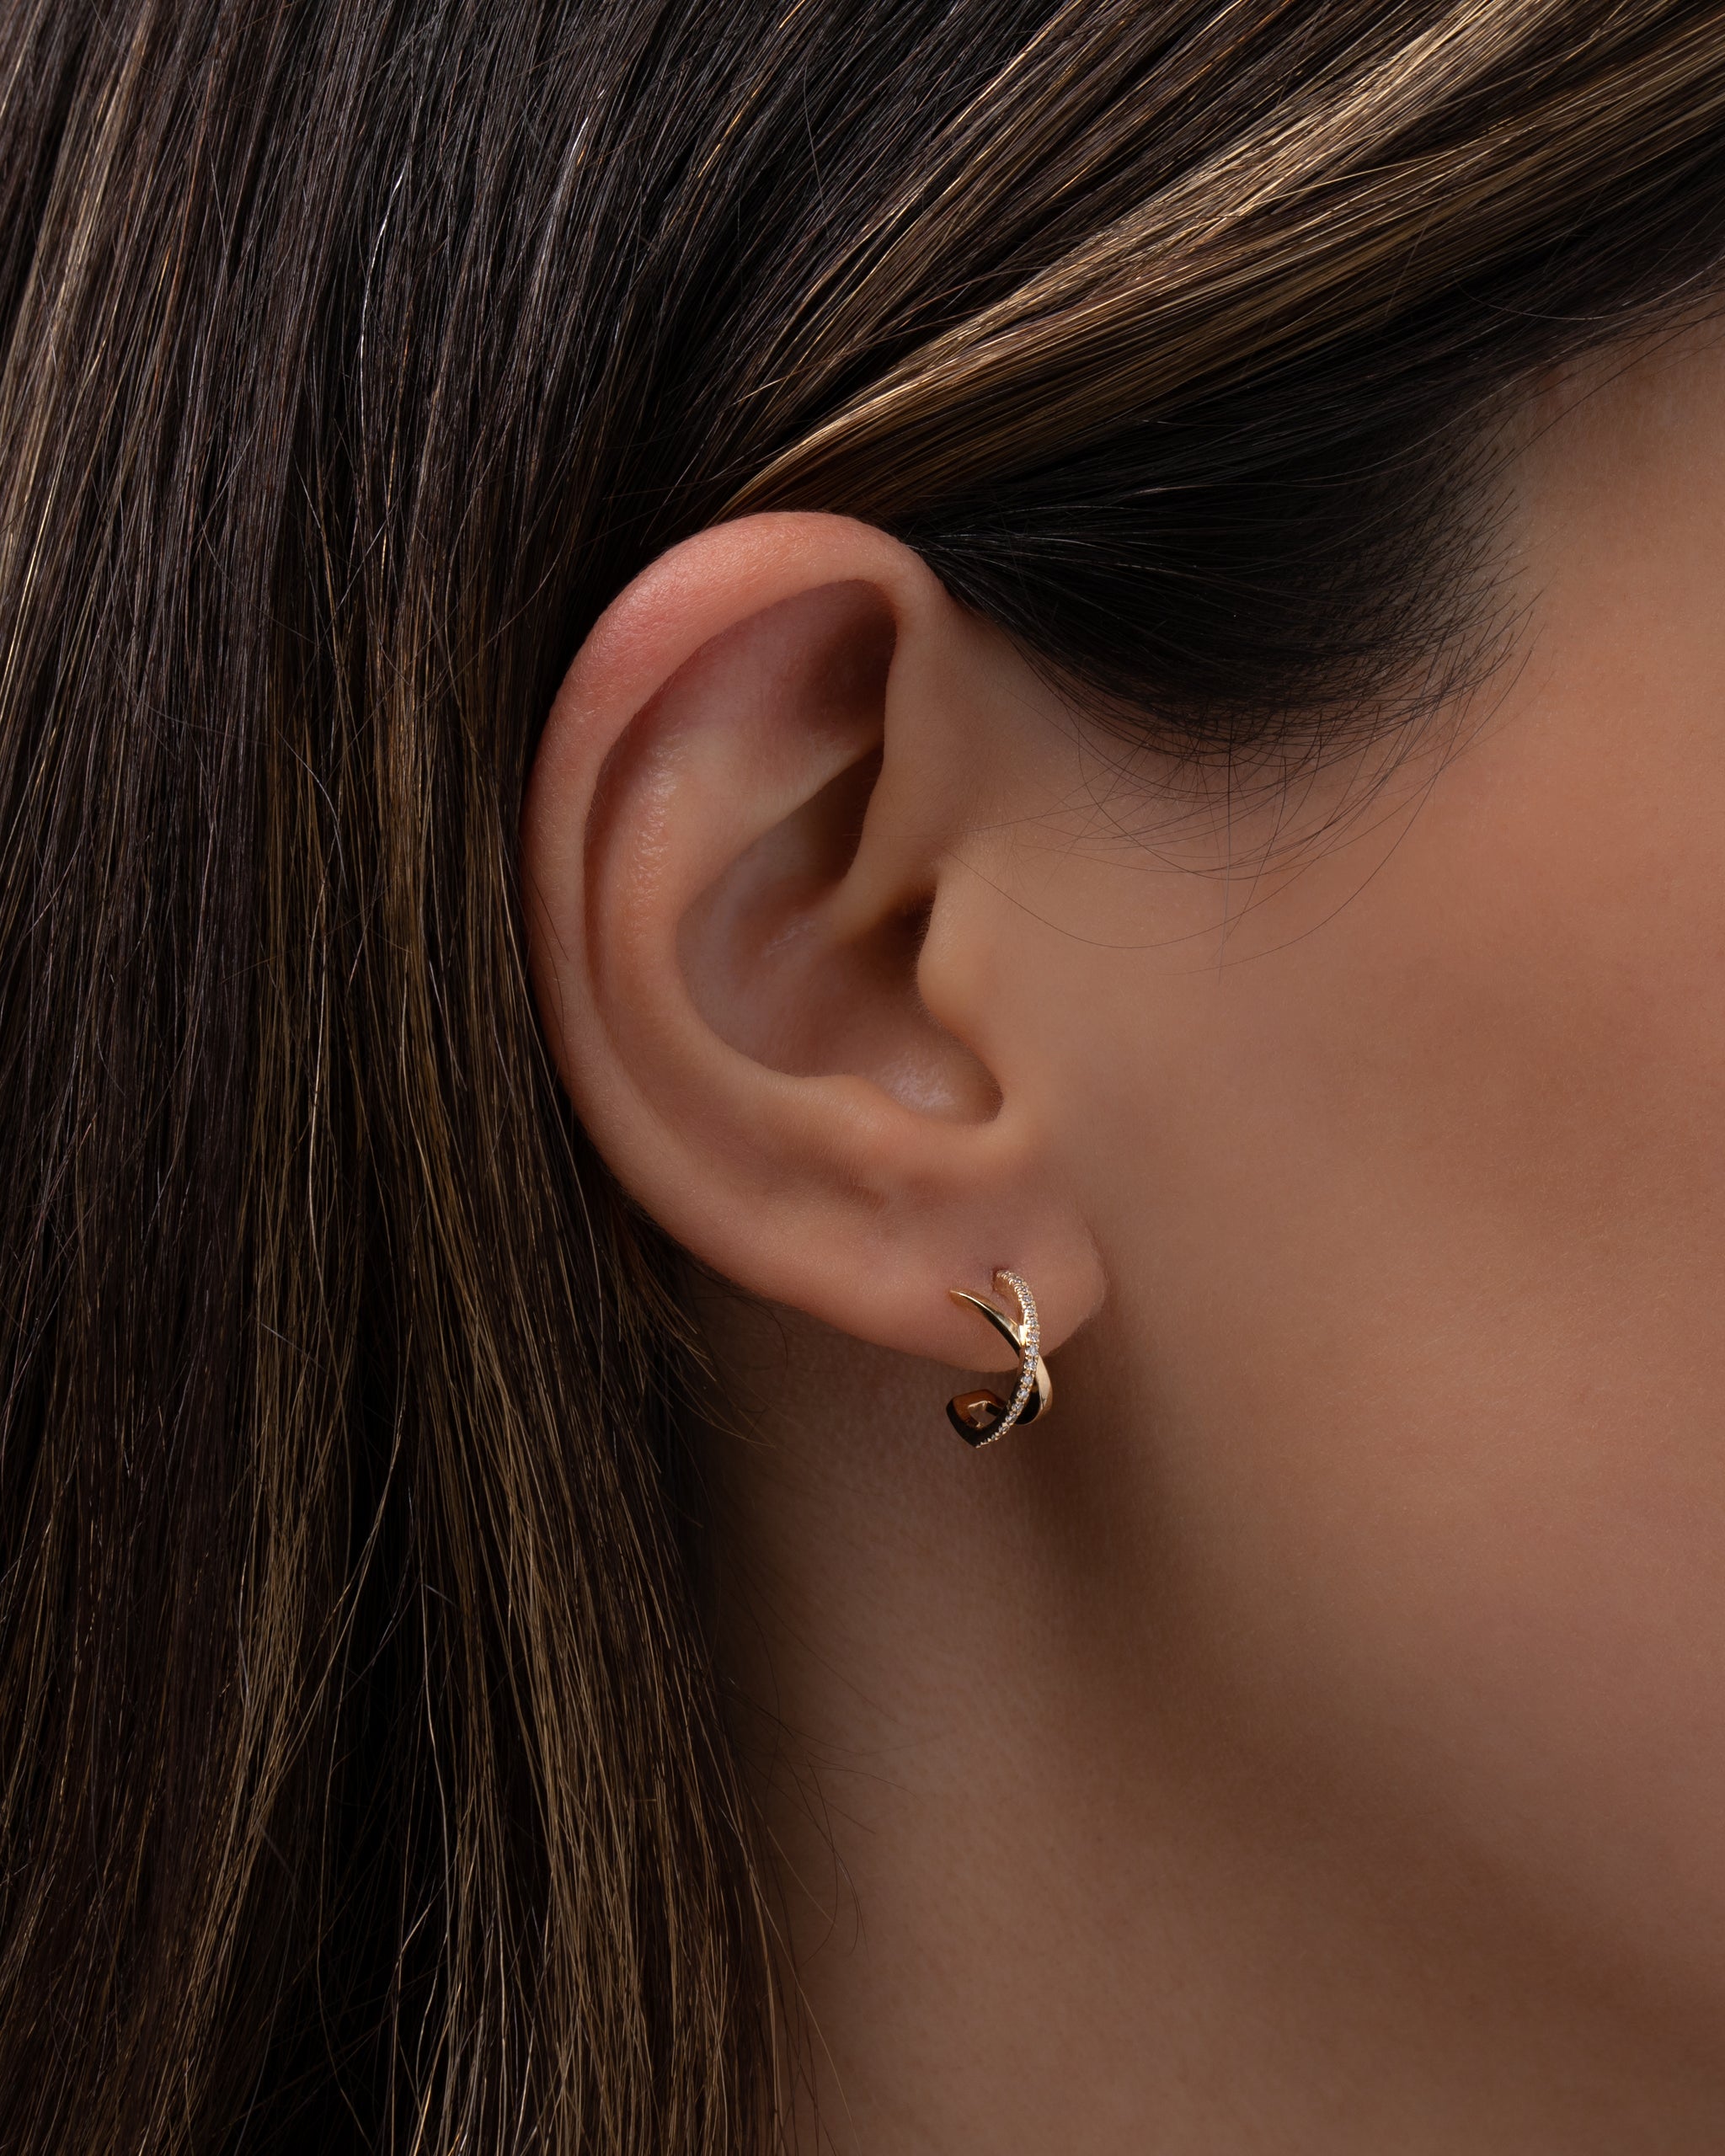 How to Buy and Wear Mismatched Earrings - Q Evon